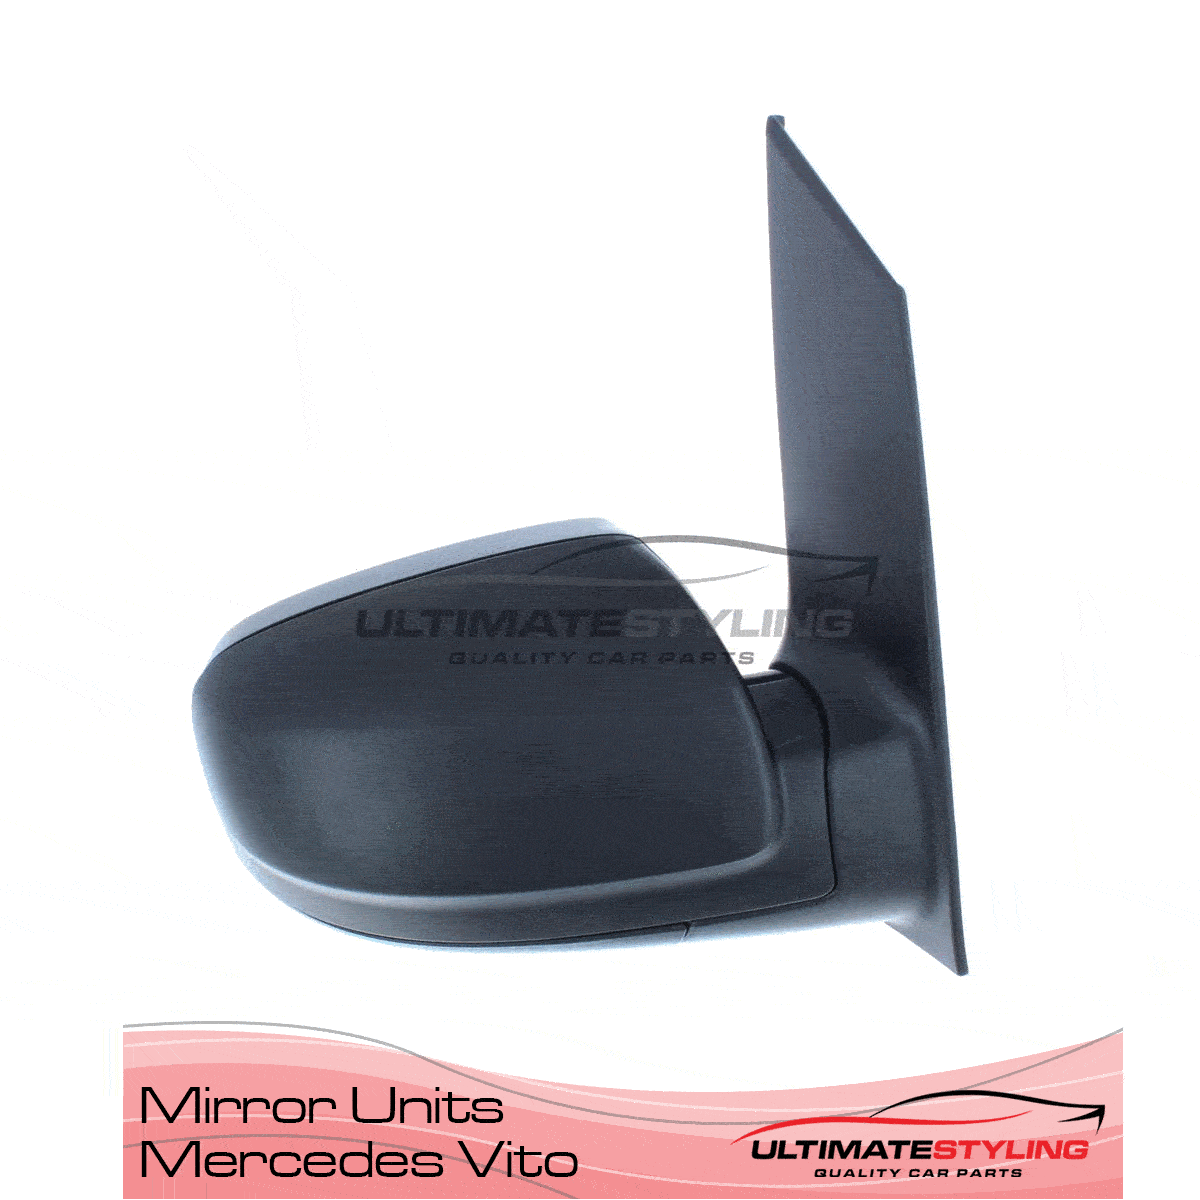 360 degree view of Mercedes Vito wing mirror